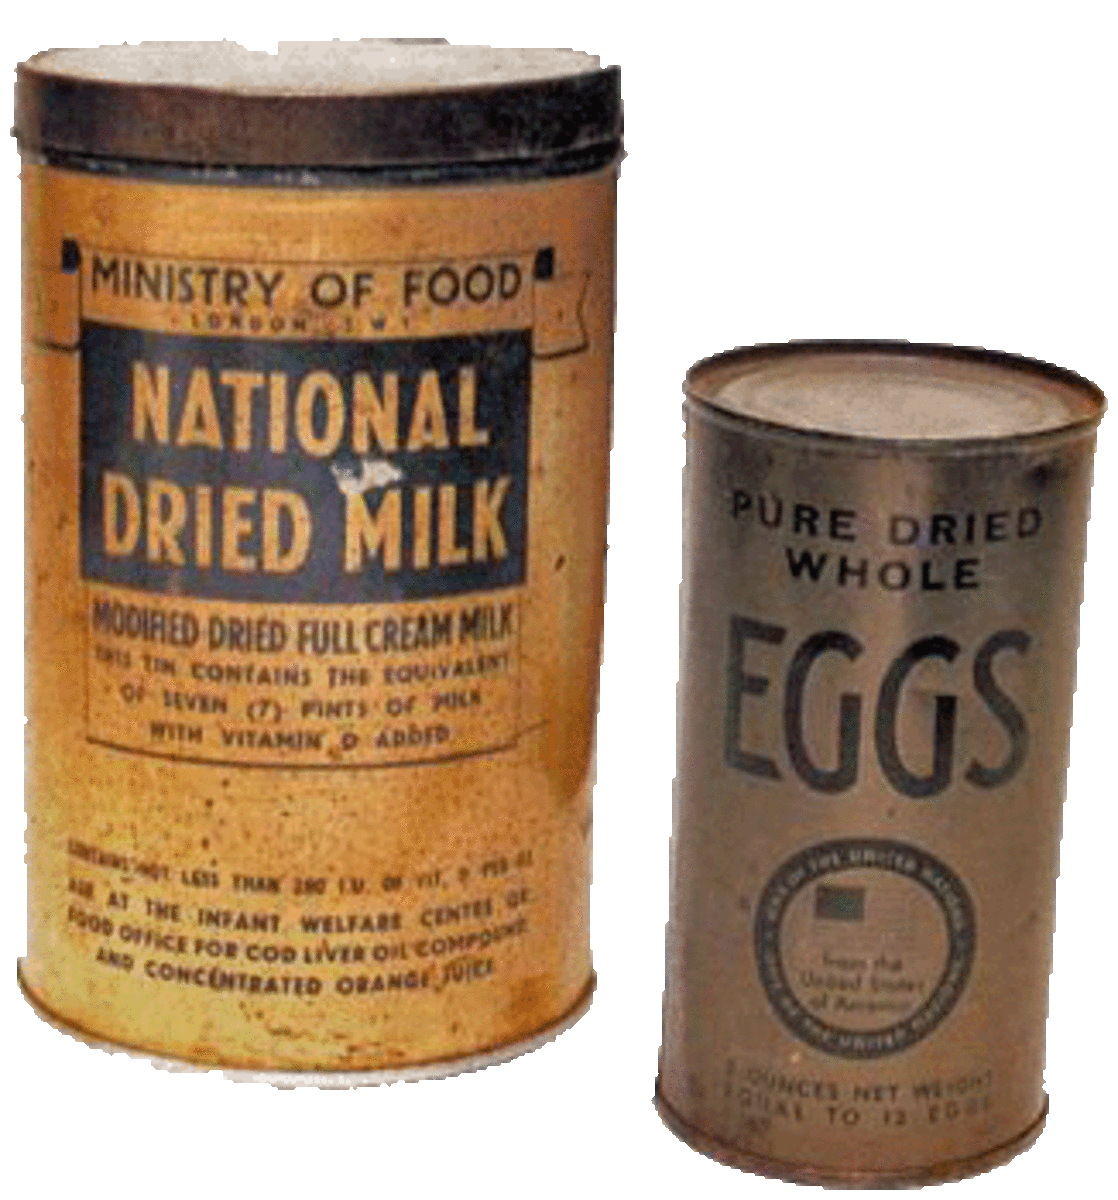 Powdered milk and eggs